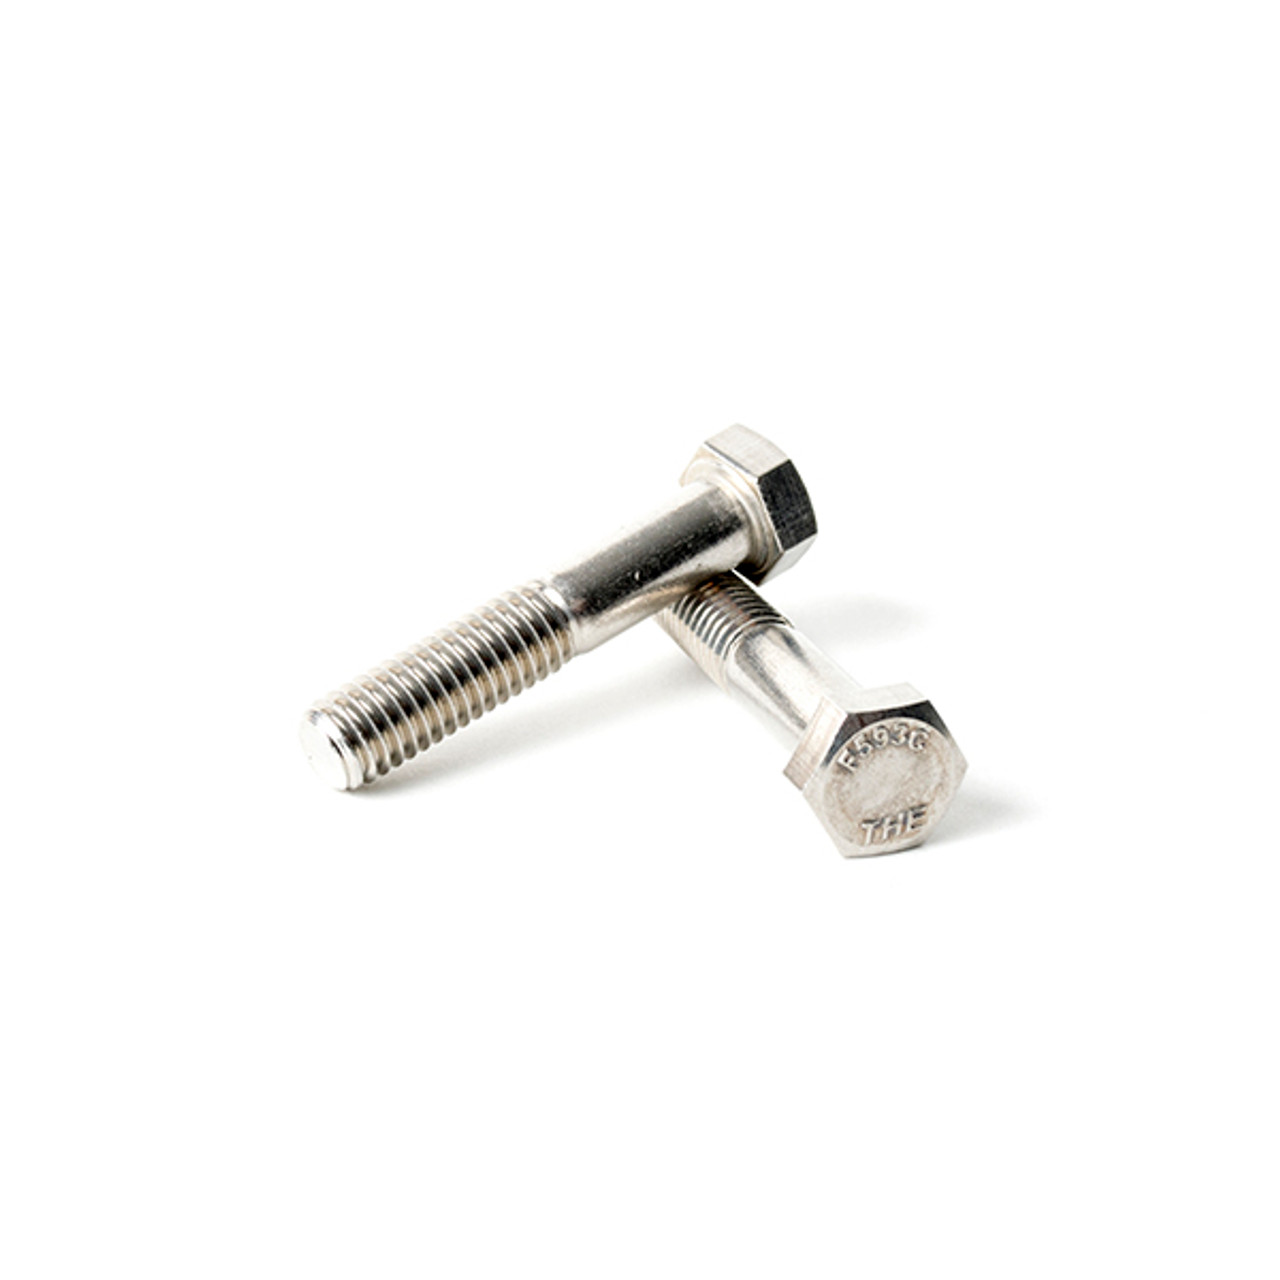 Hex Cap Screws 18-8 Stainless Steel 8-16 x 1" FT Qty-100 - 2